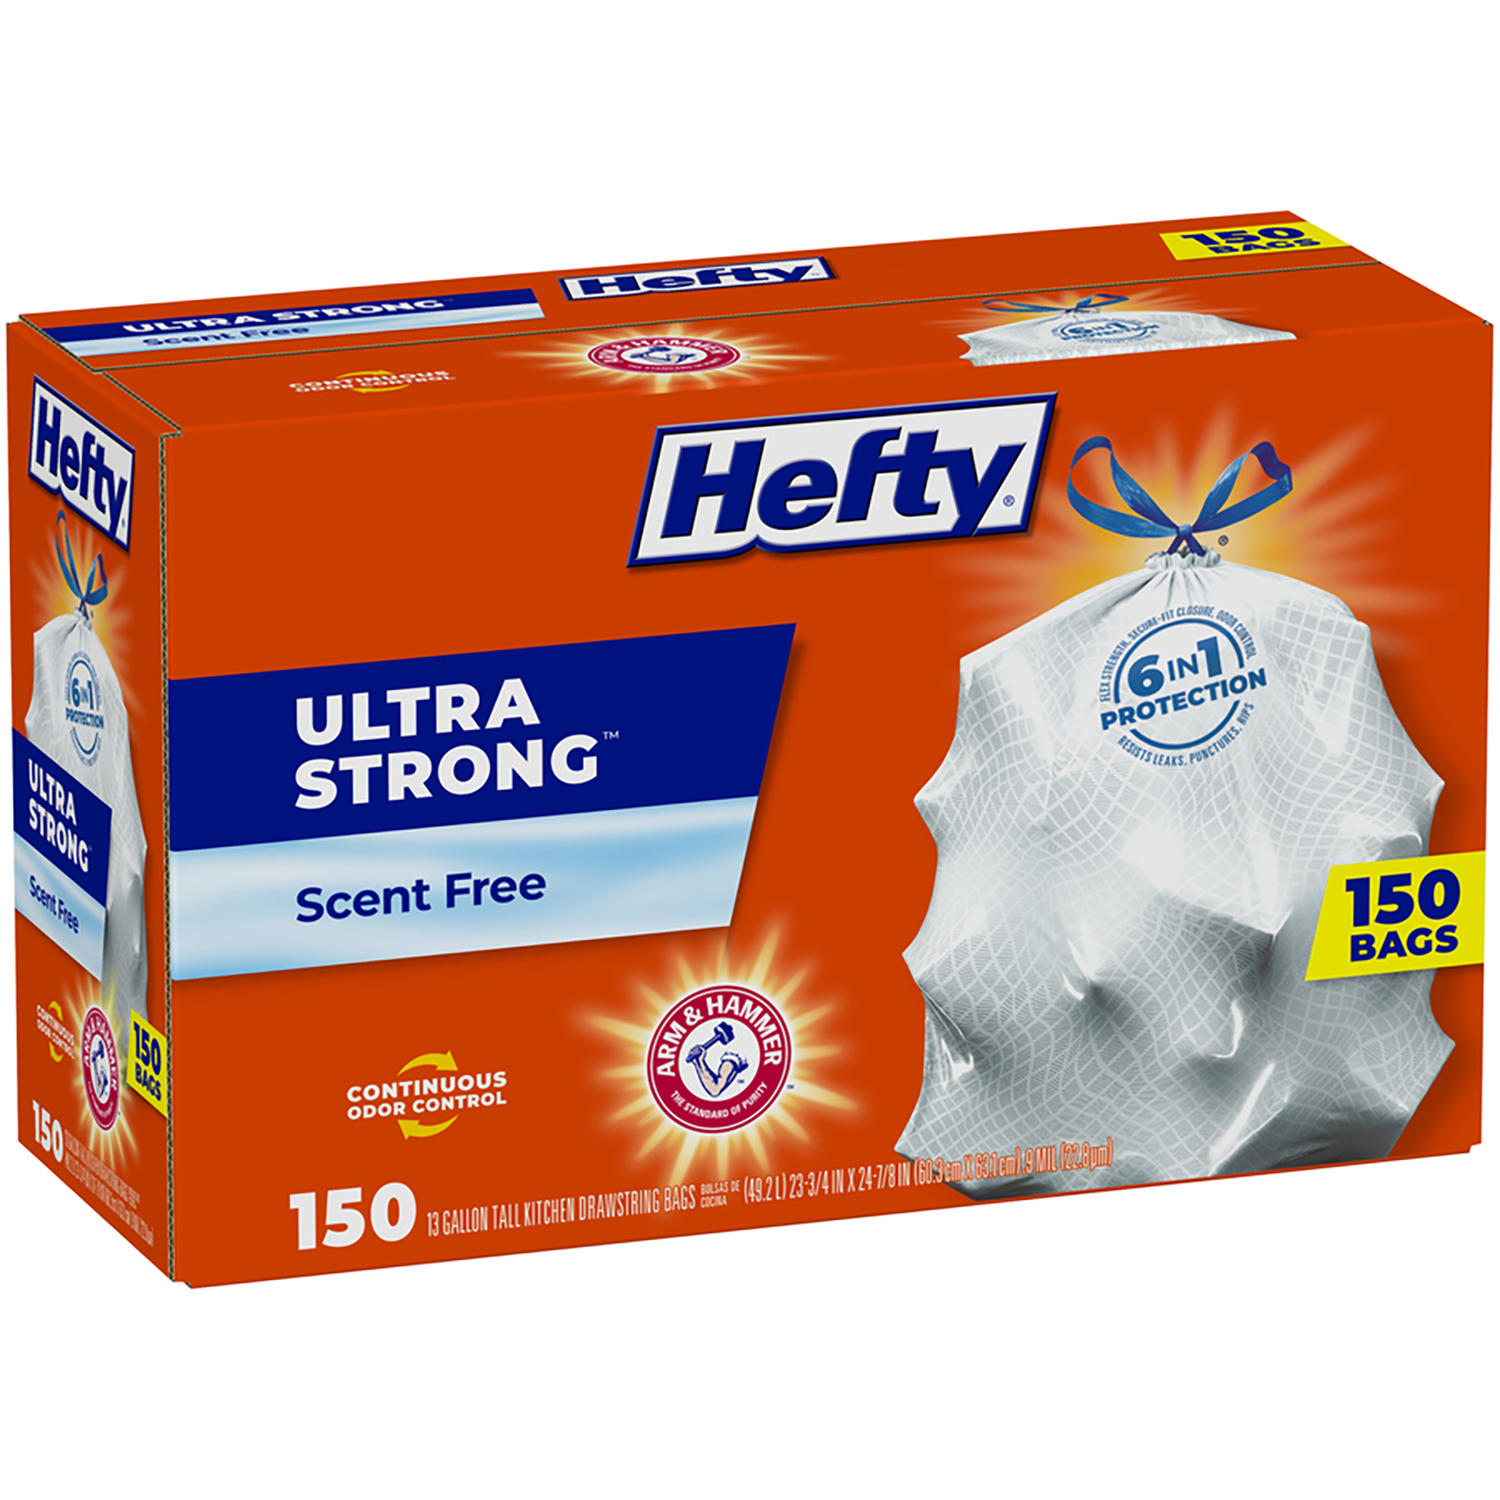 Hefty Small Garbage Bags, Drawstring, Fabuloso Scent, 4 Gallon, 20 Count 